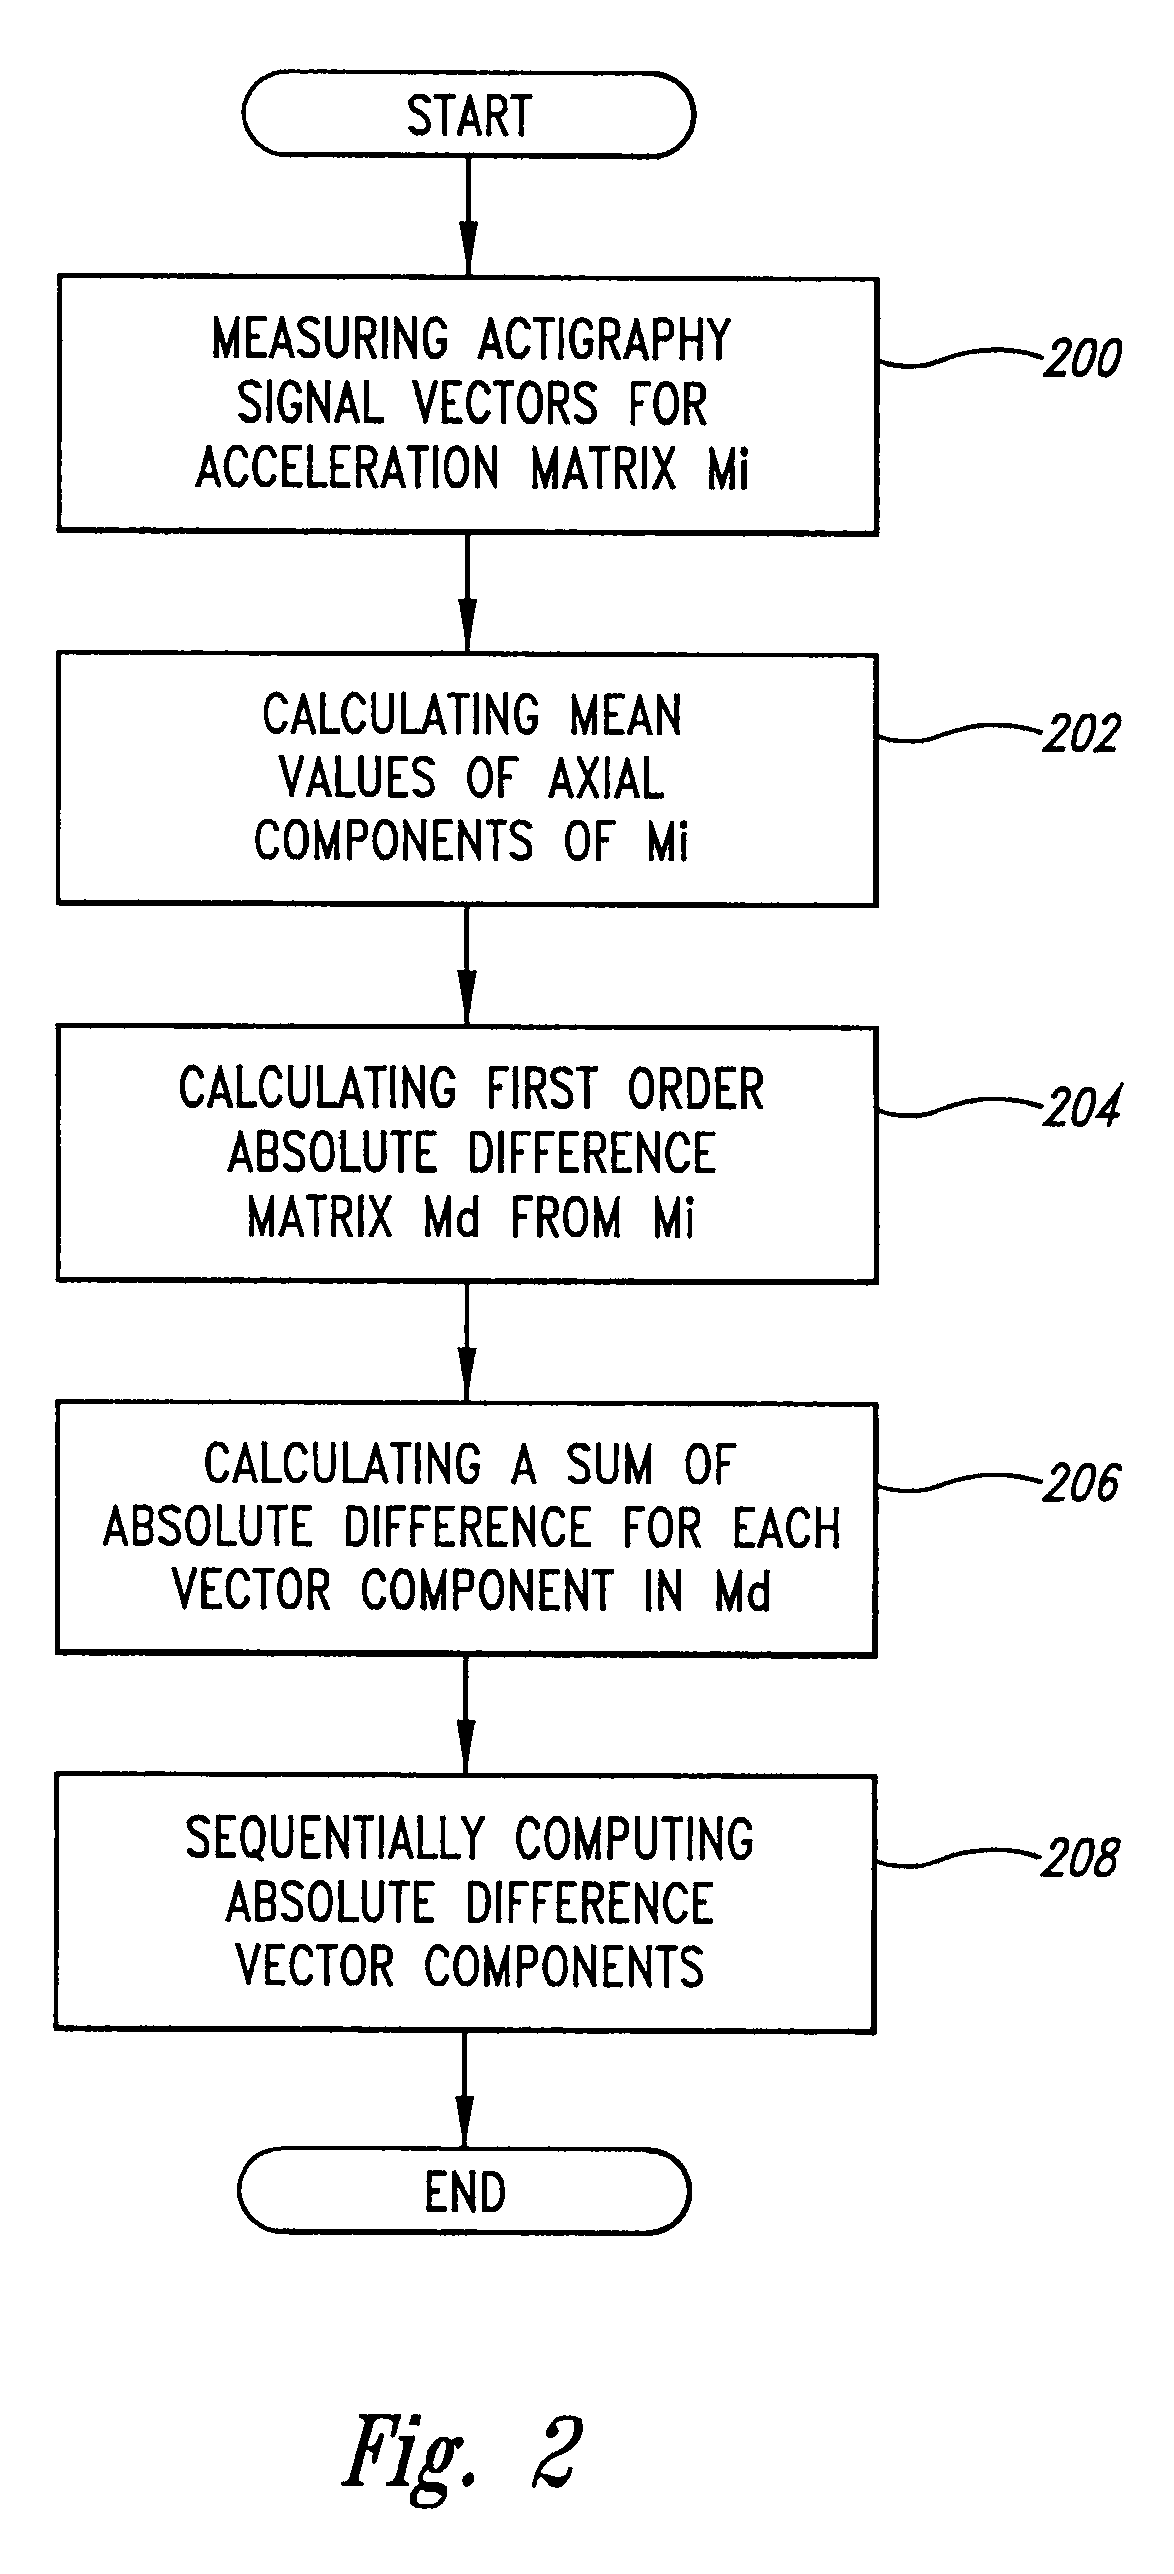 Ambulatory patient monitoring apparatus, system and method